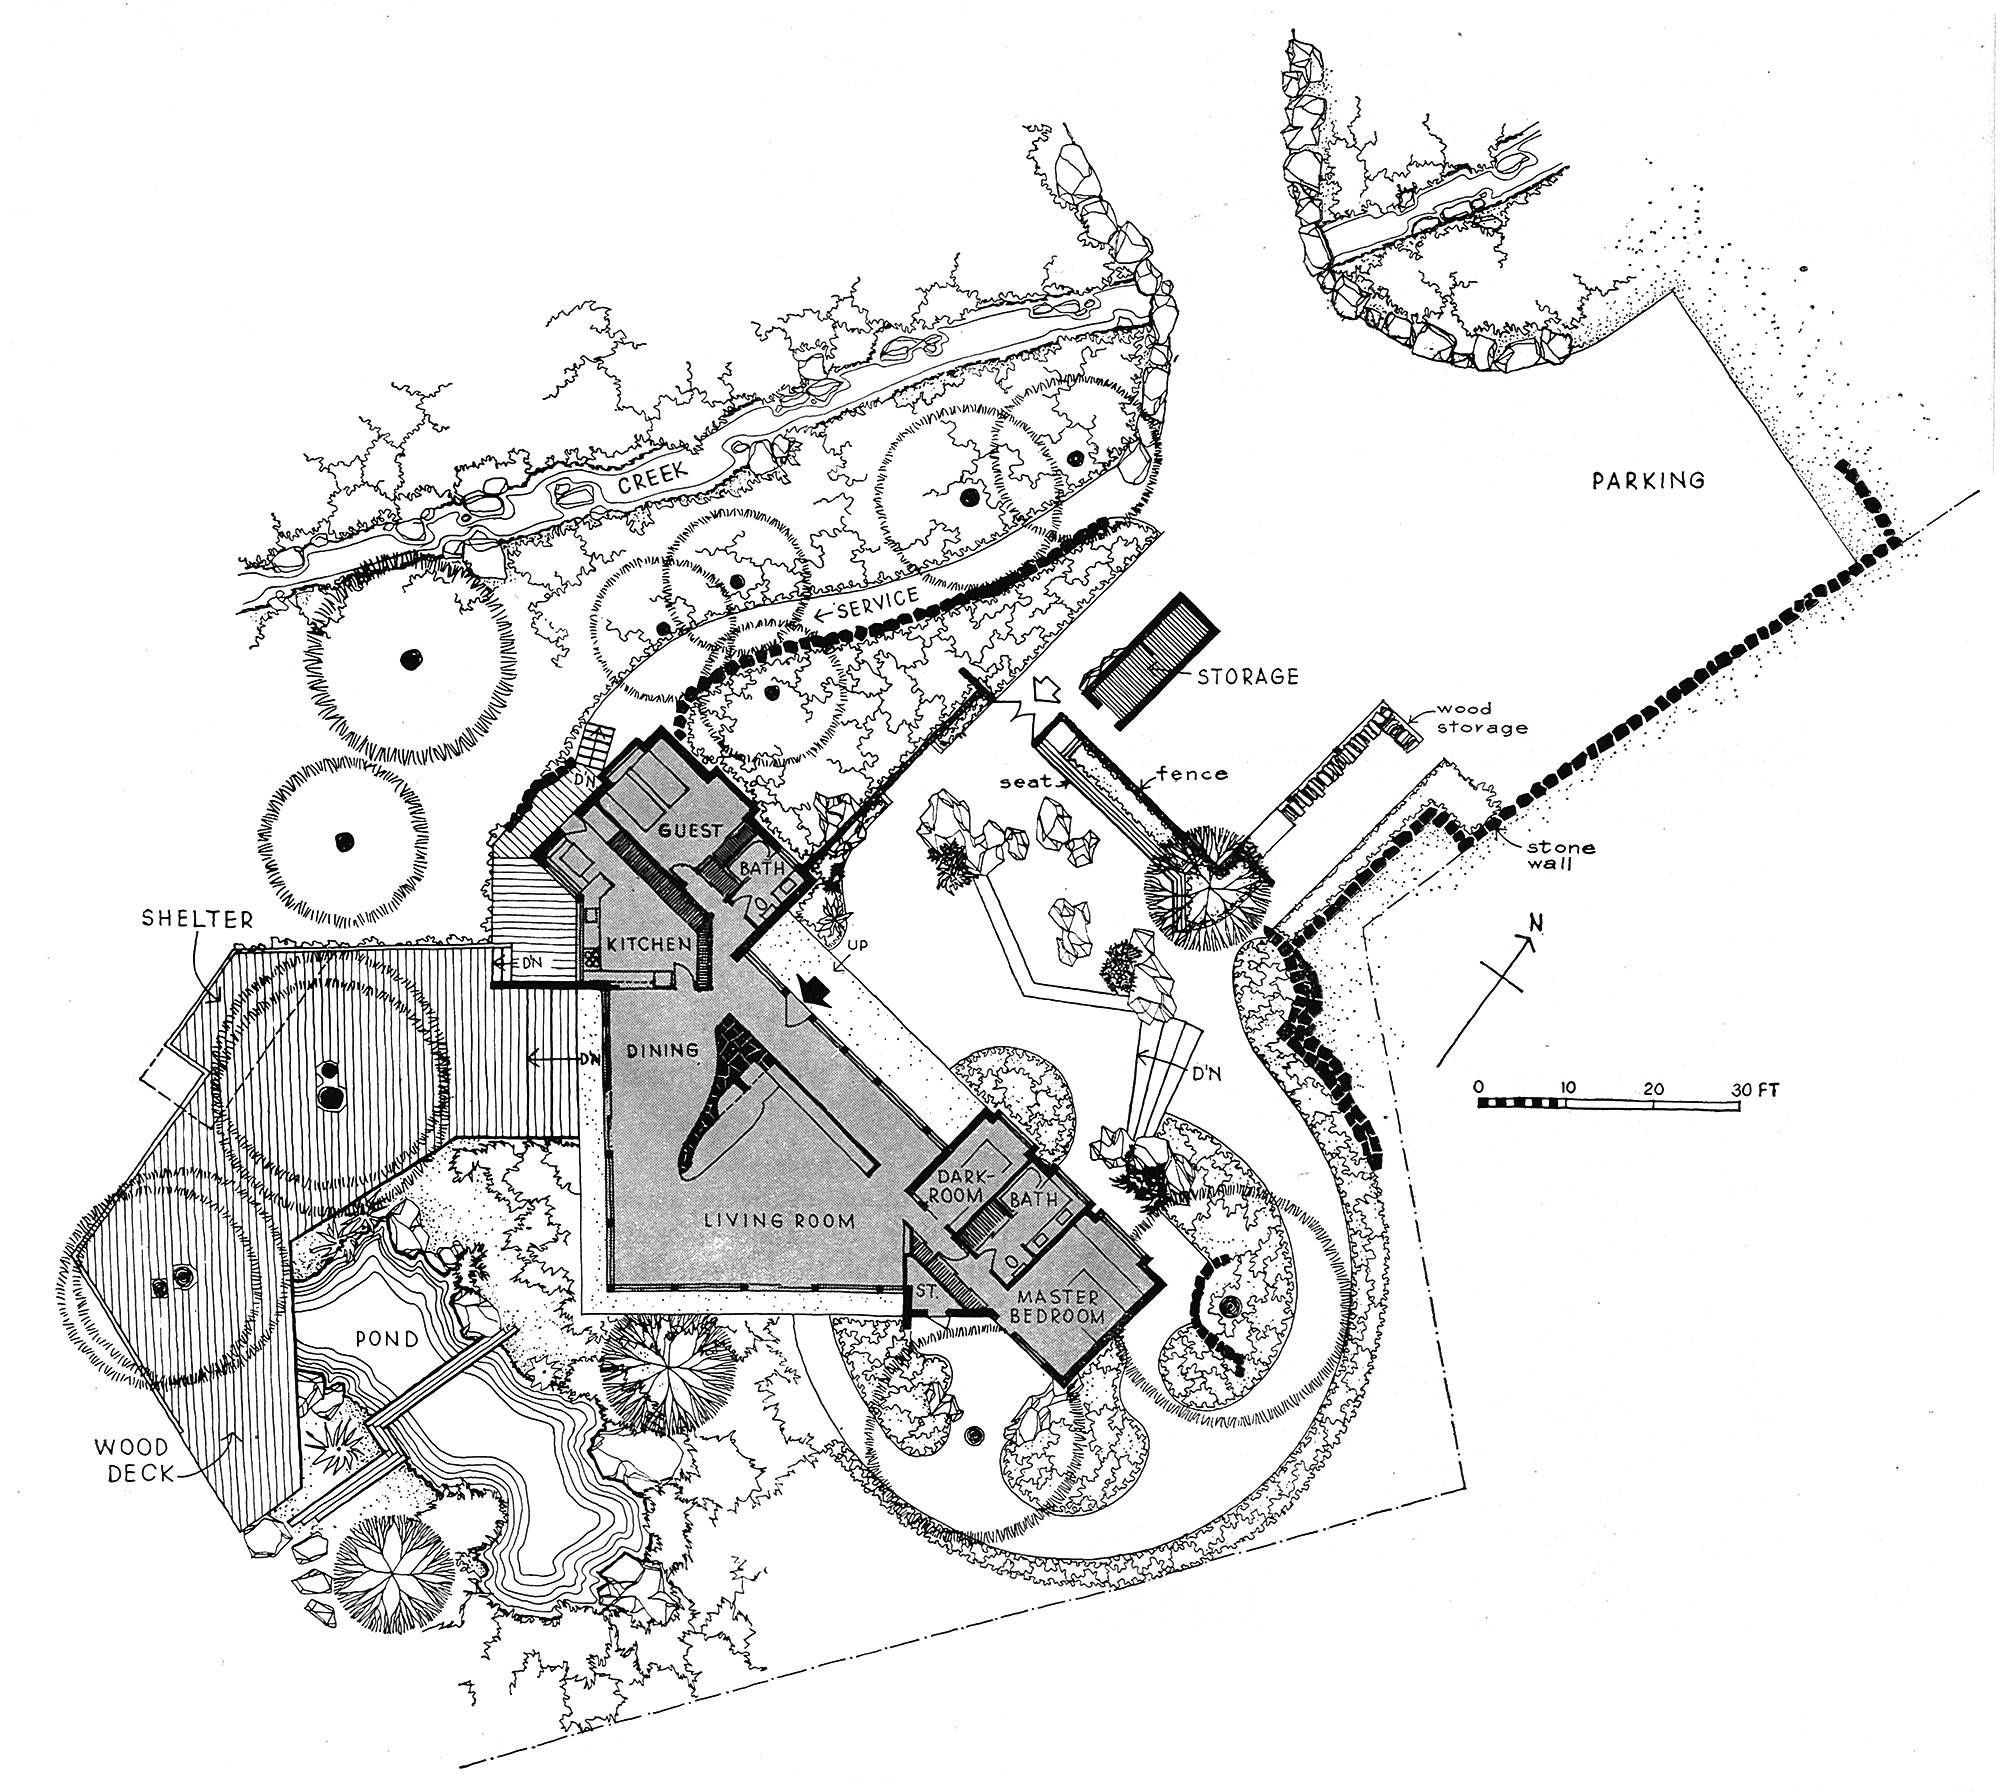 Architectural site plan for a grand estate from a birds eye view in black and white